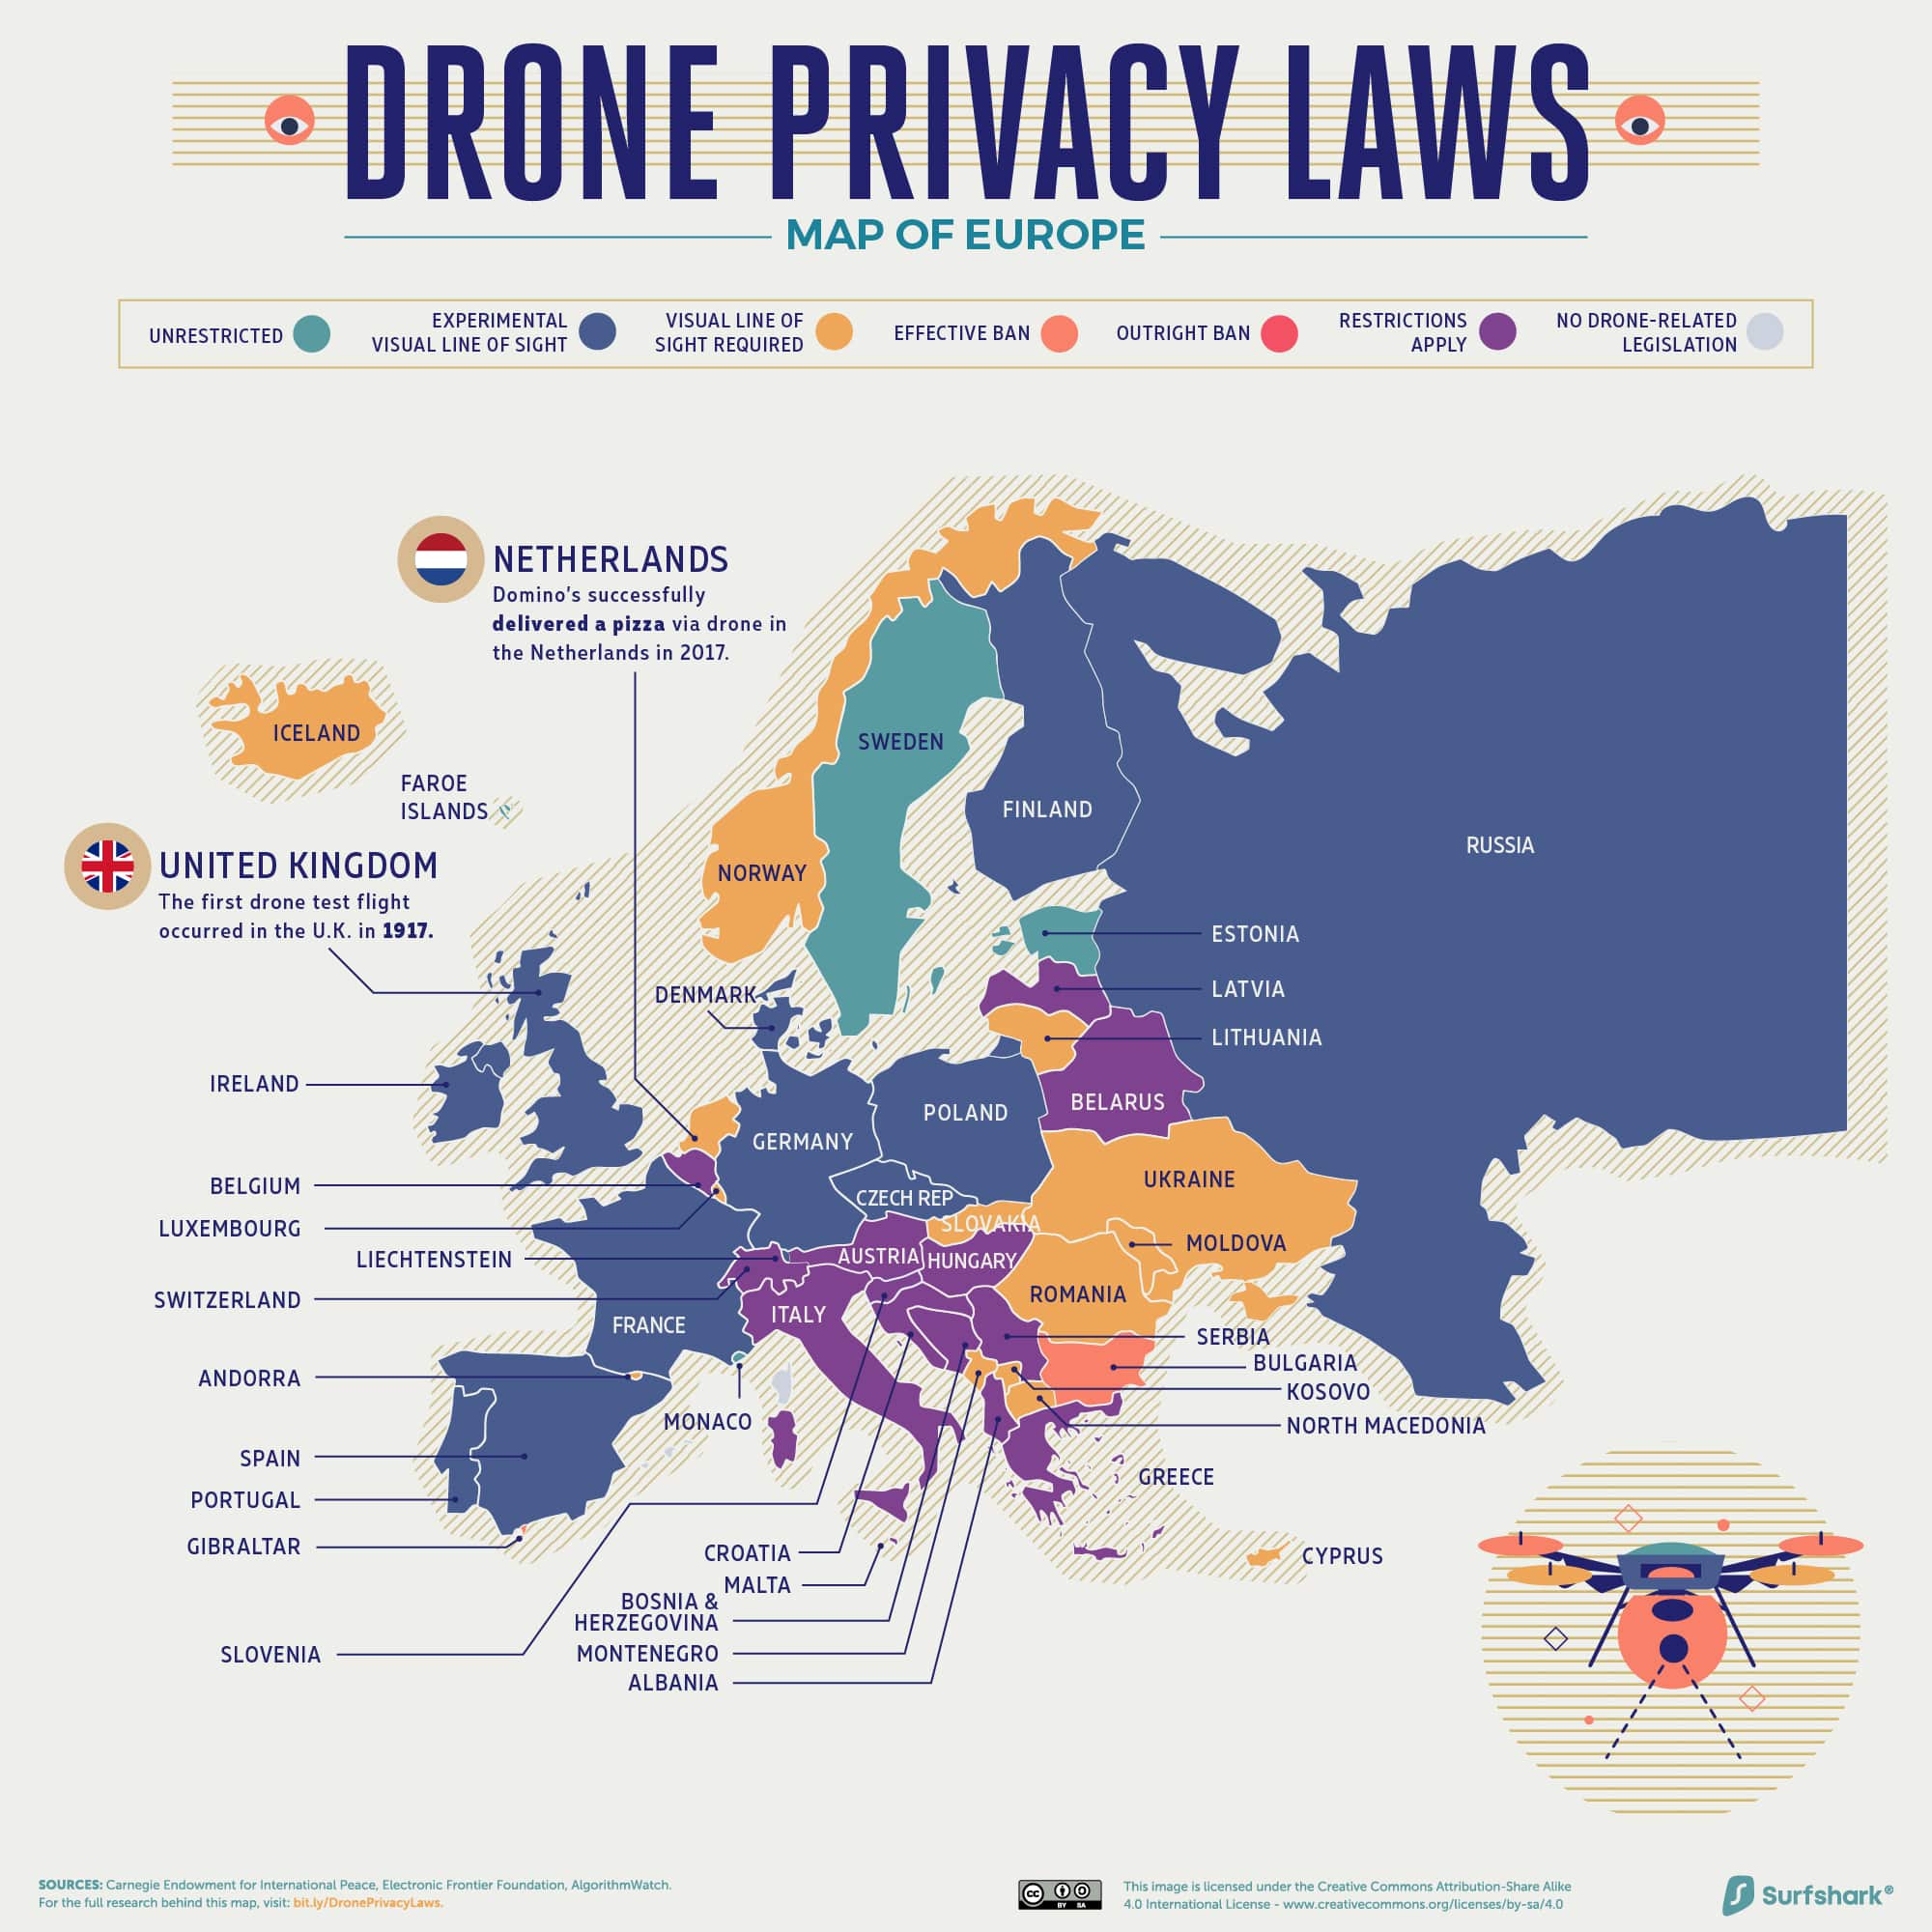 a map of Europe with drone privacy laws for each country coded in color